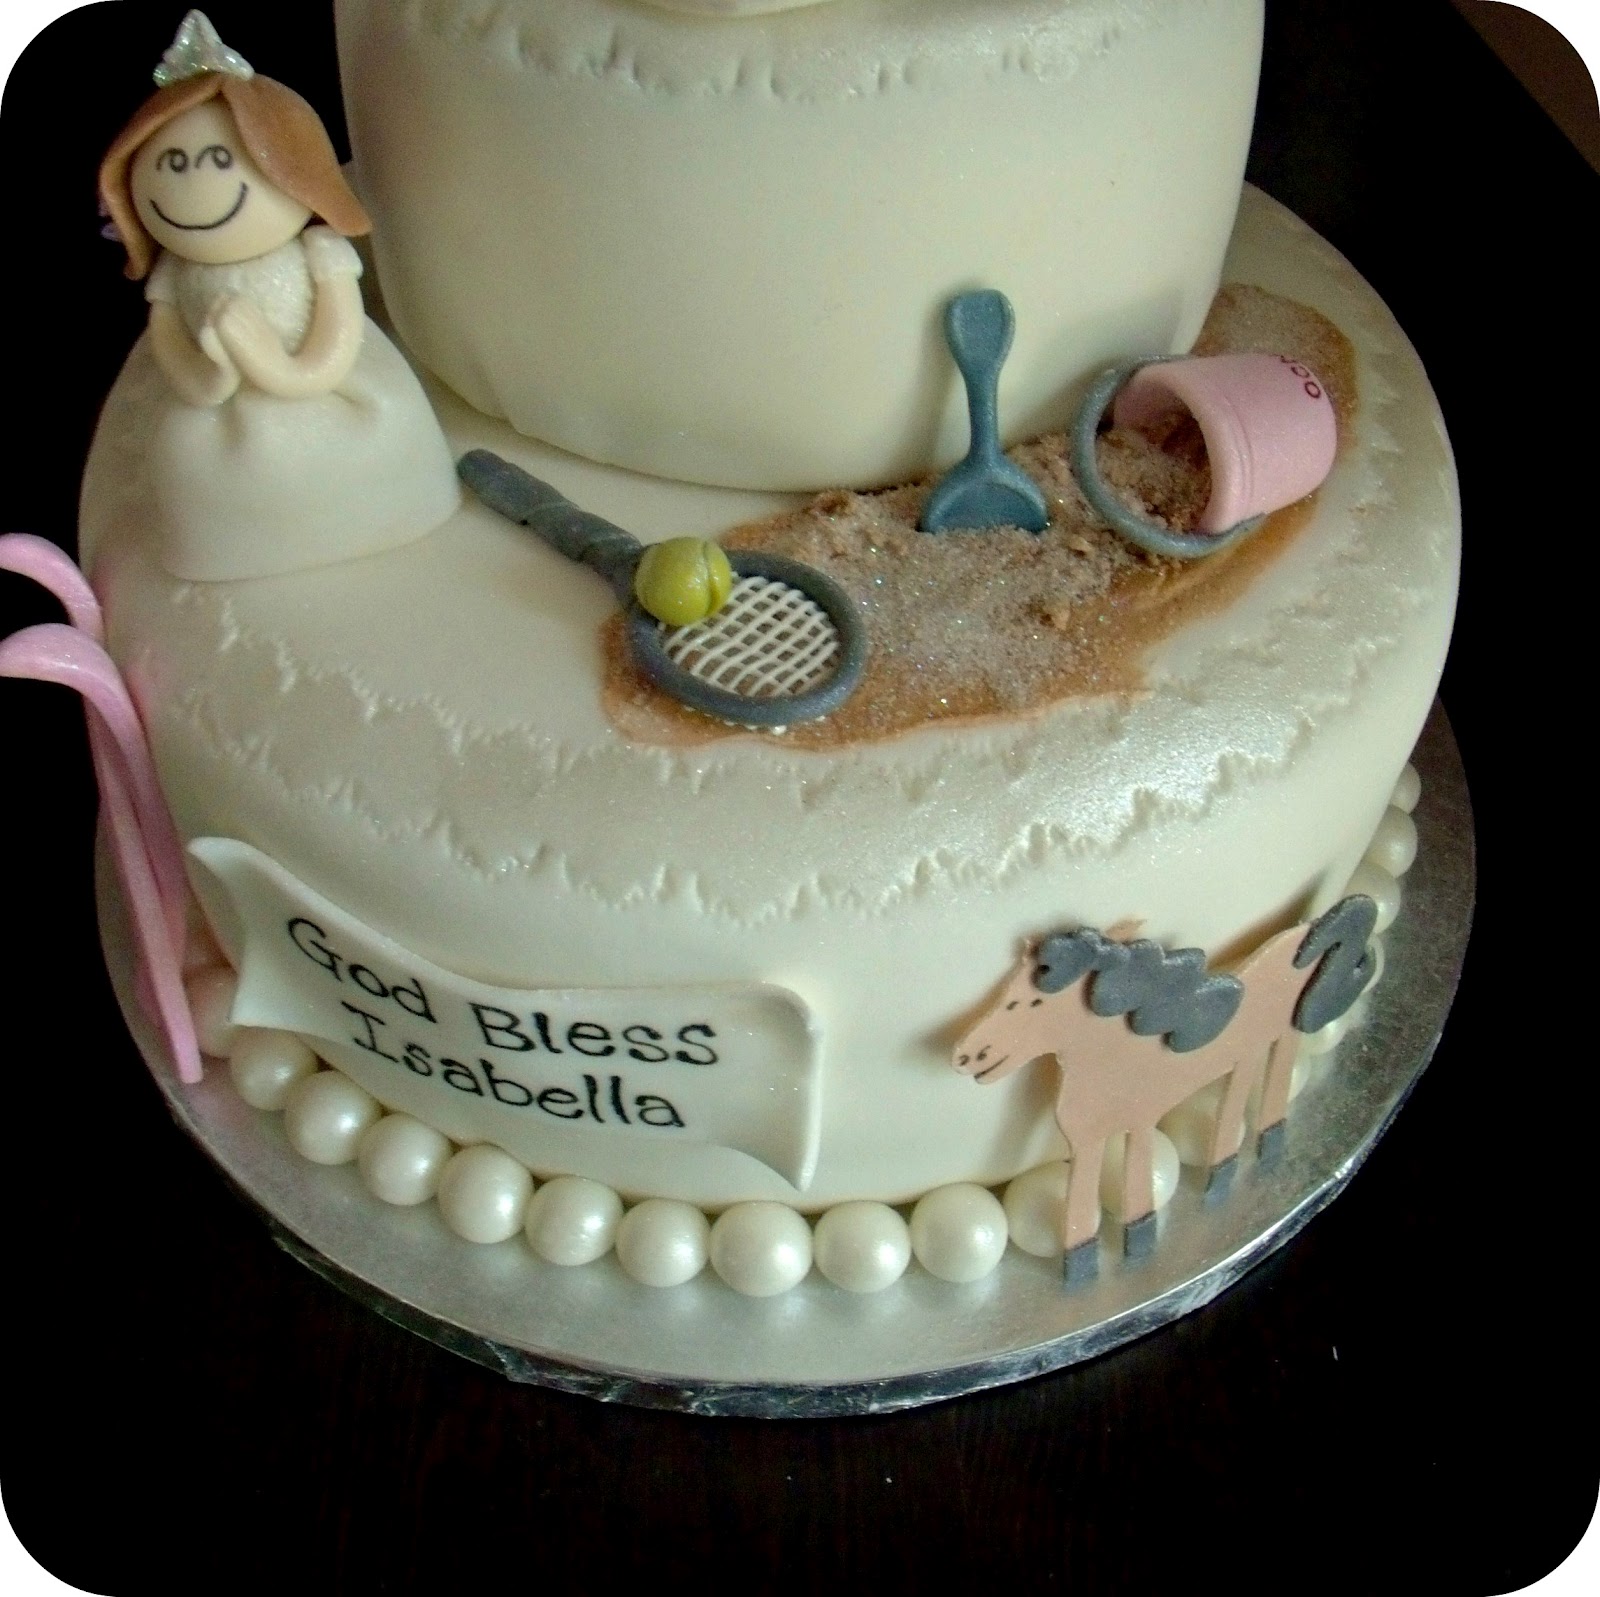 Frog prince: First Holy Communion Cake and Cookies~